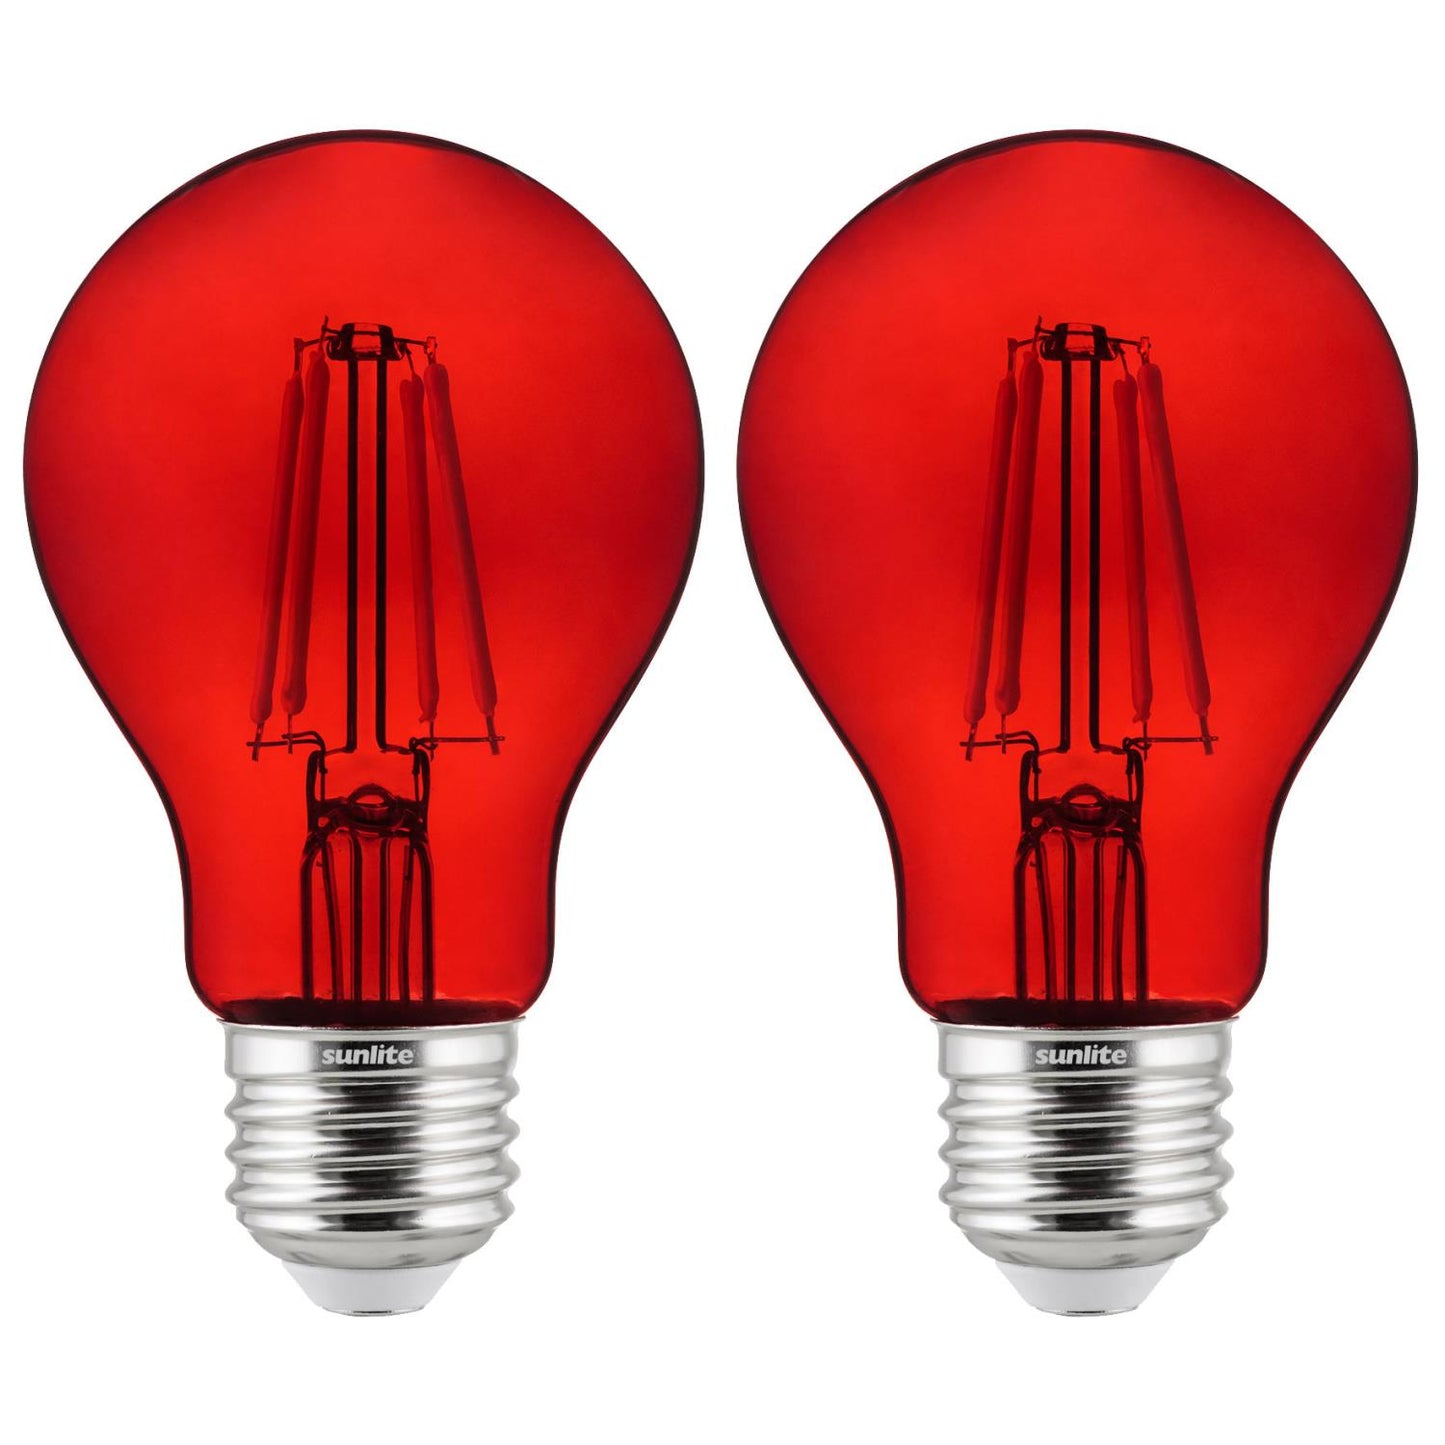 2-Pack Sunlite LED Transparent Red A19 Filament Bulbs, 4.5 Watts, Dimmable, UL Listed